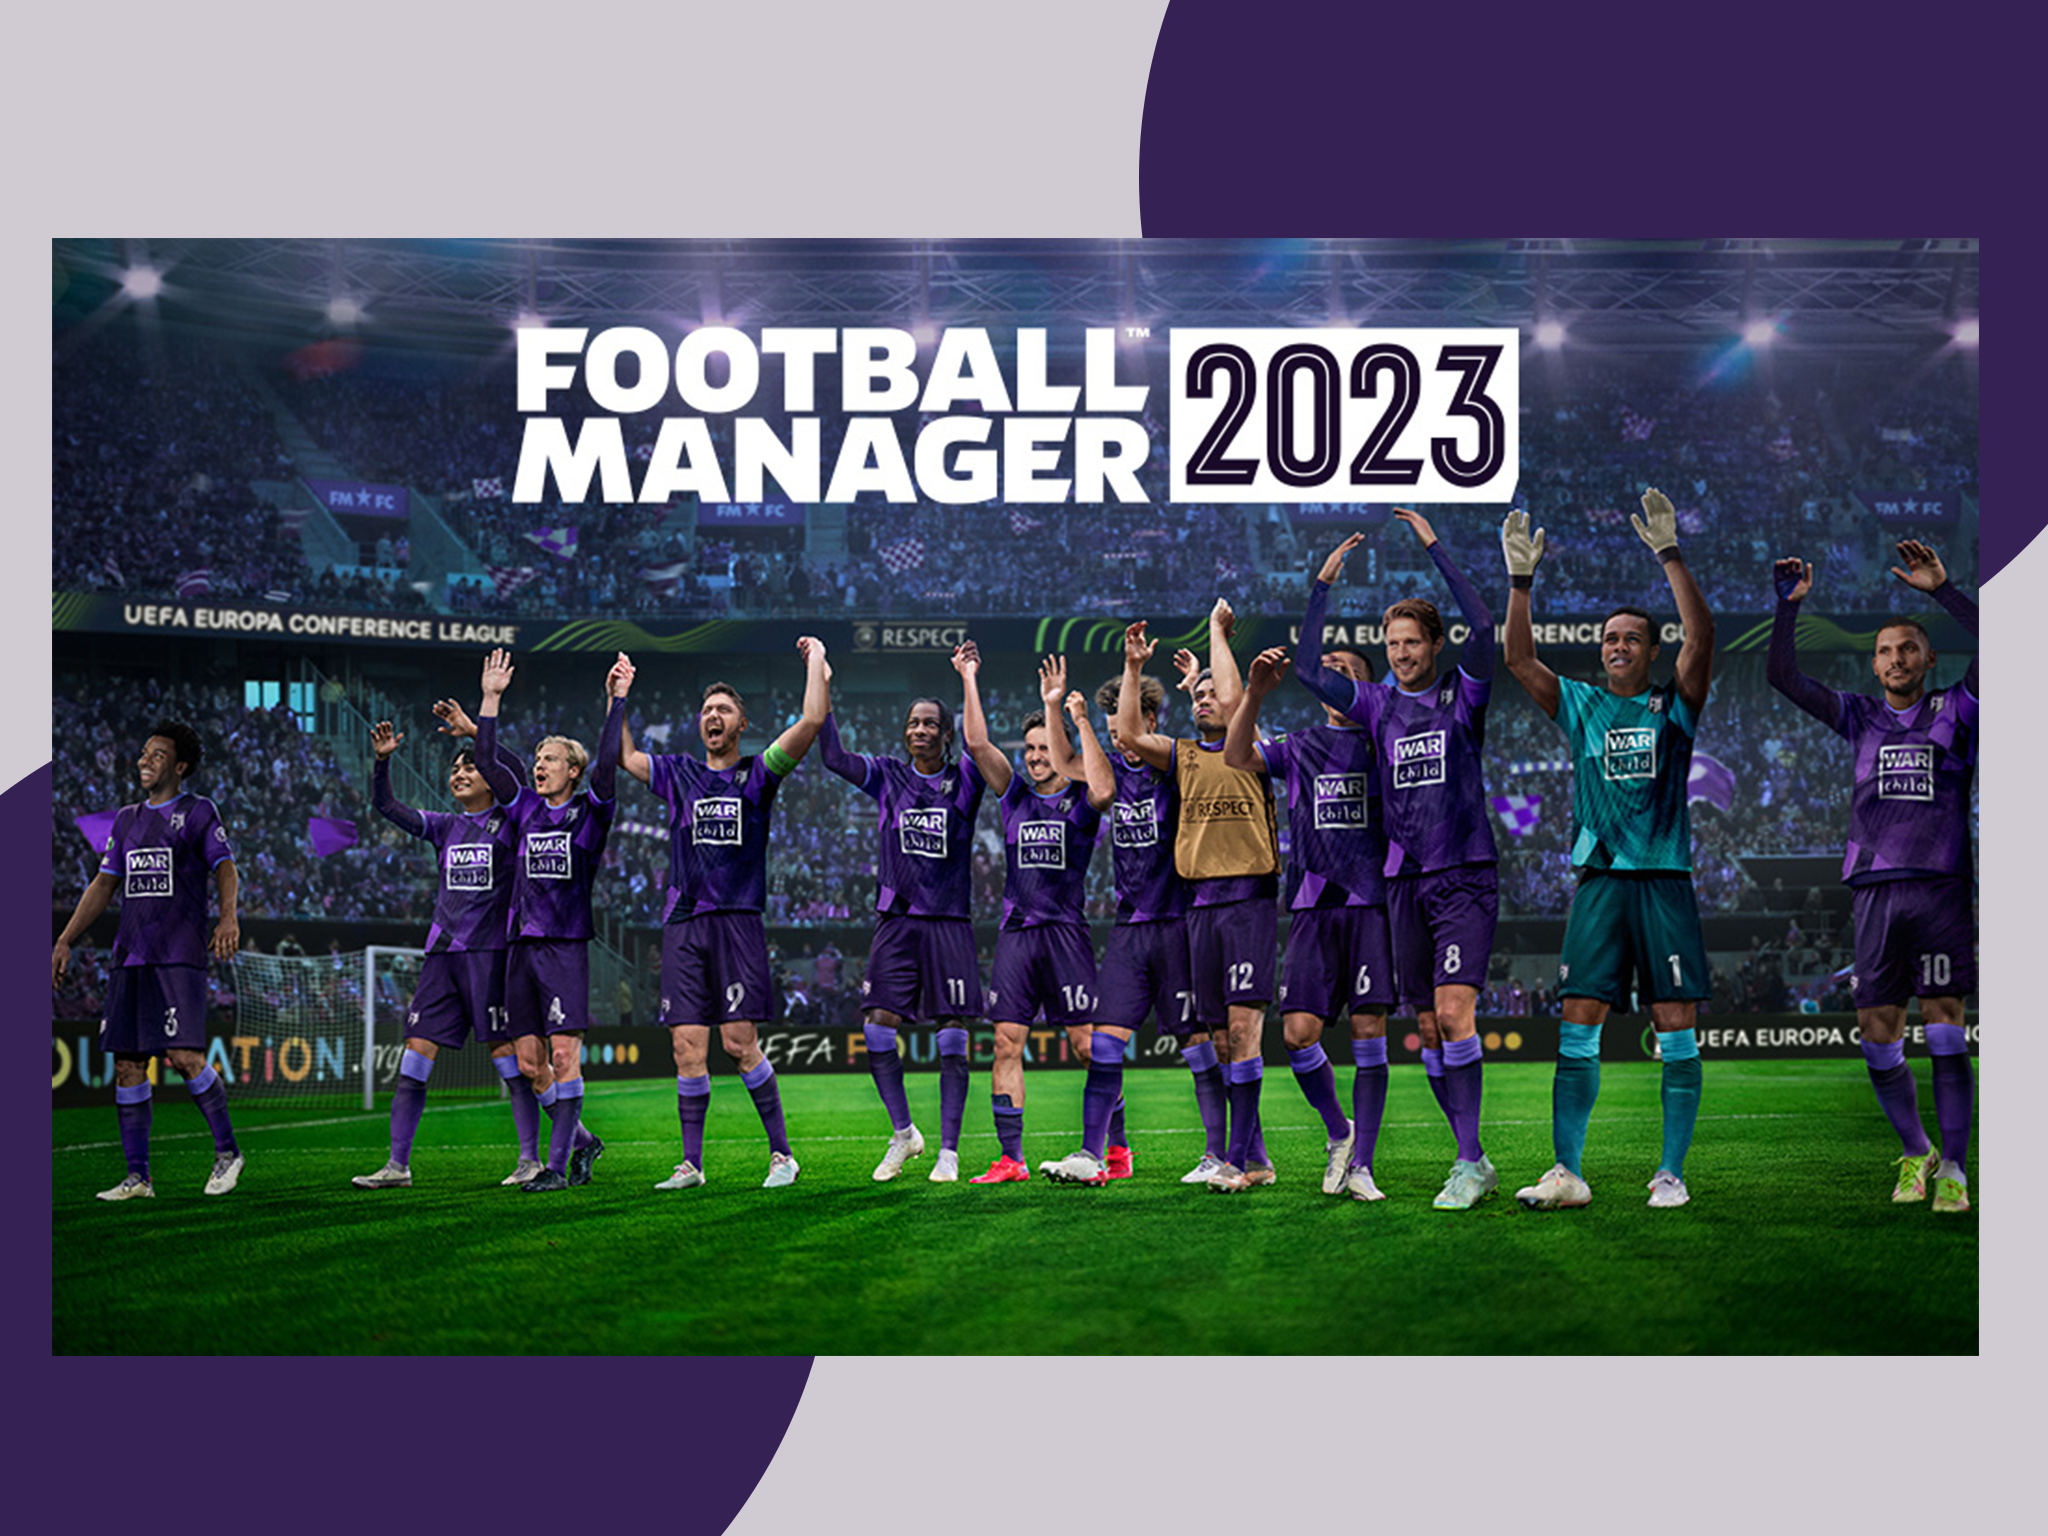 Football Manager 2022 for iOS, Android: requirements, compatible